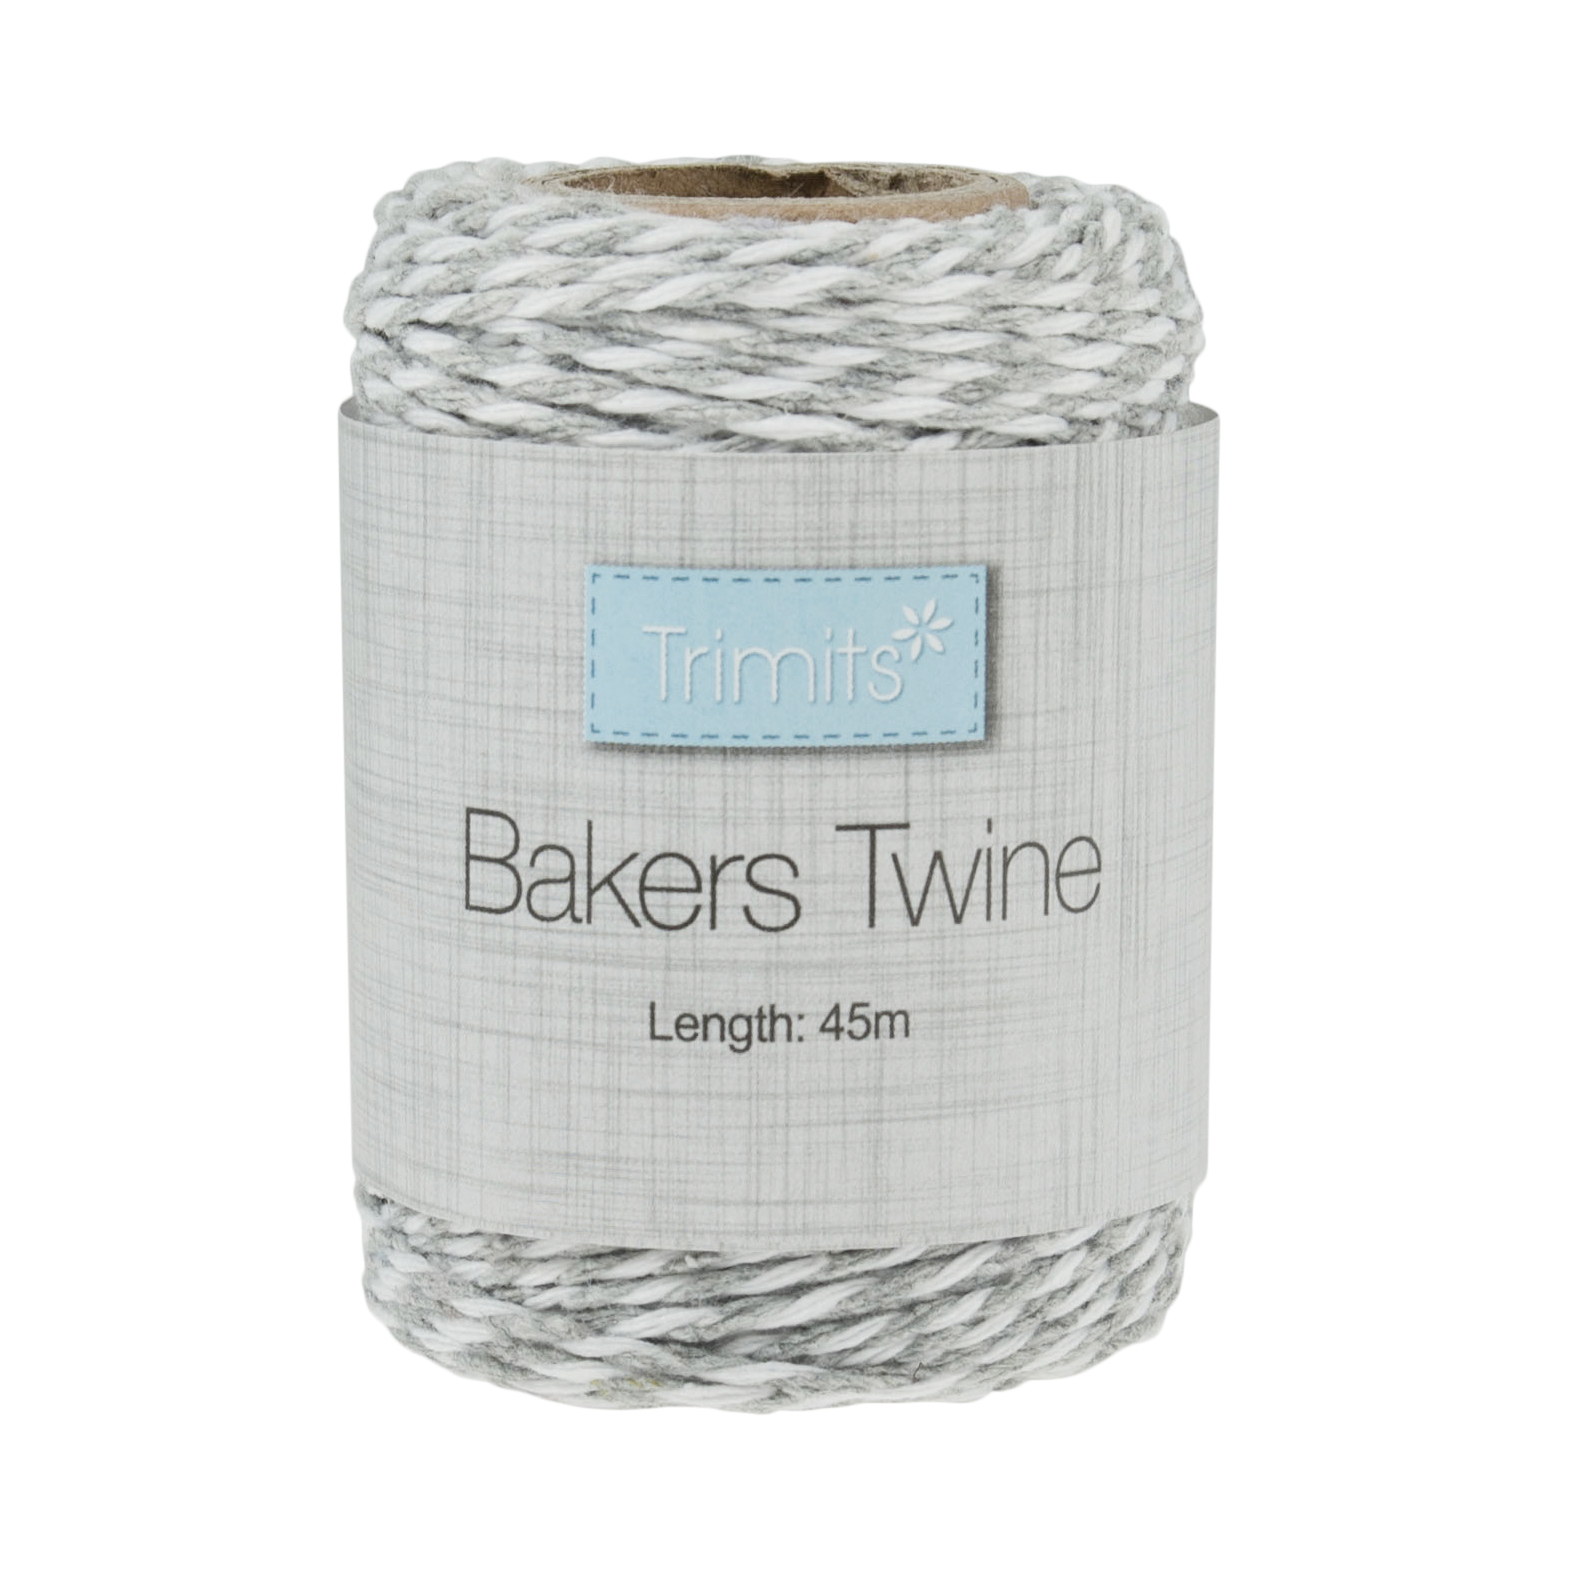 Buy A Bakers Twine: 45m x 2mm: Grey and White